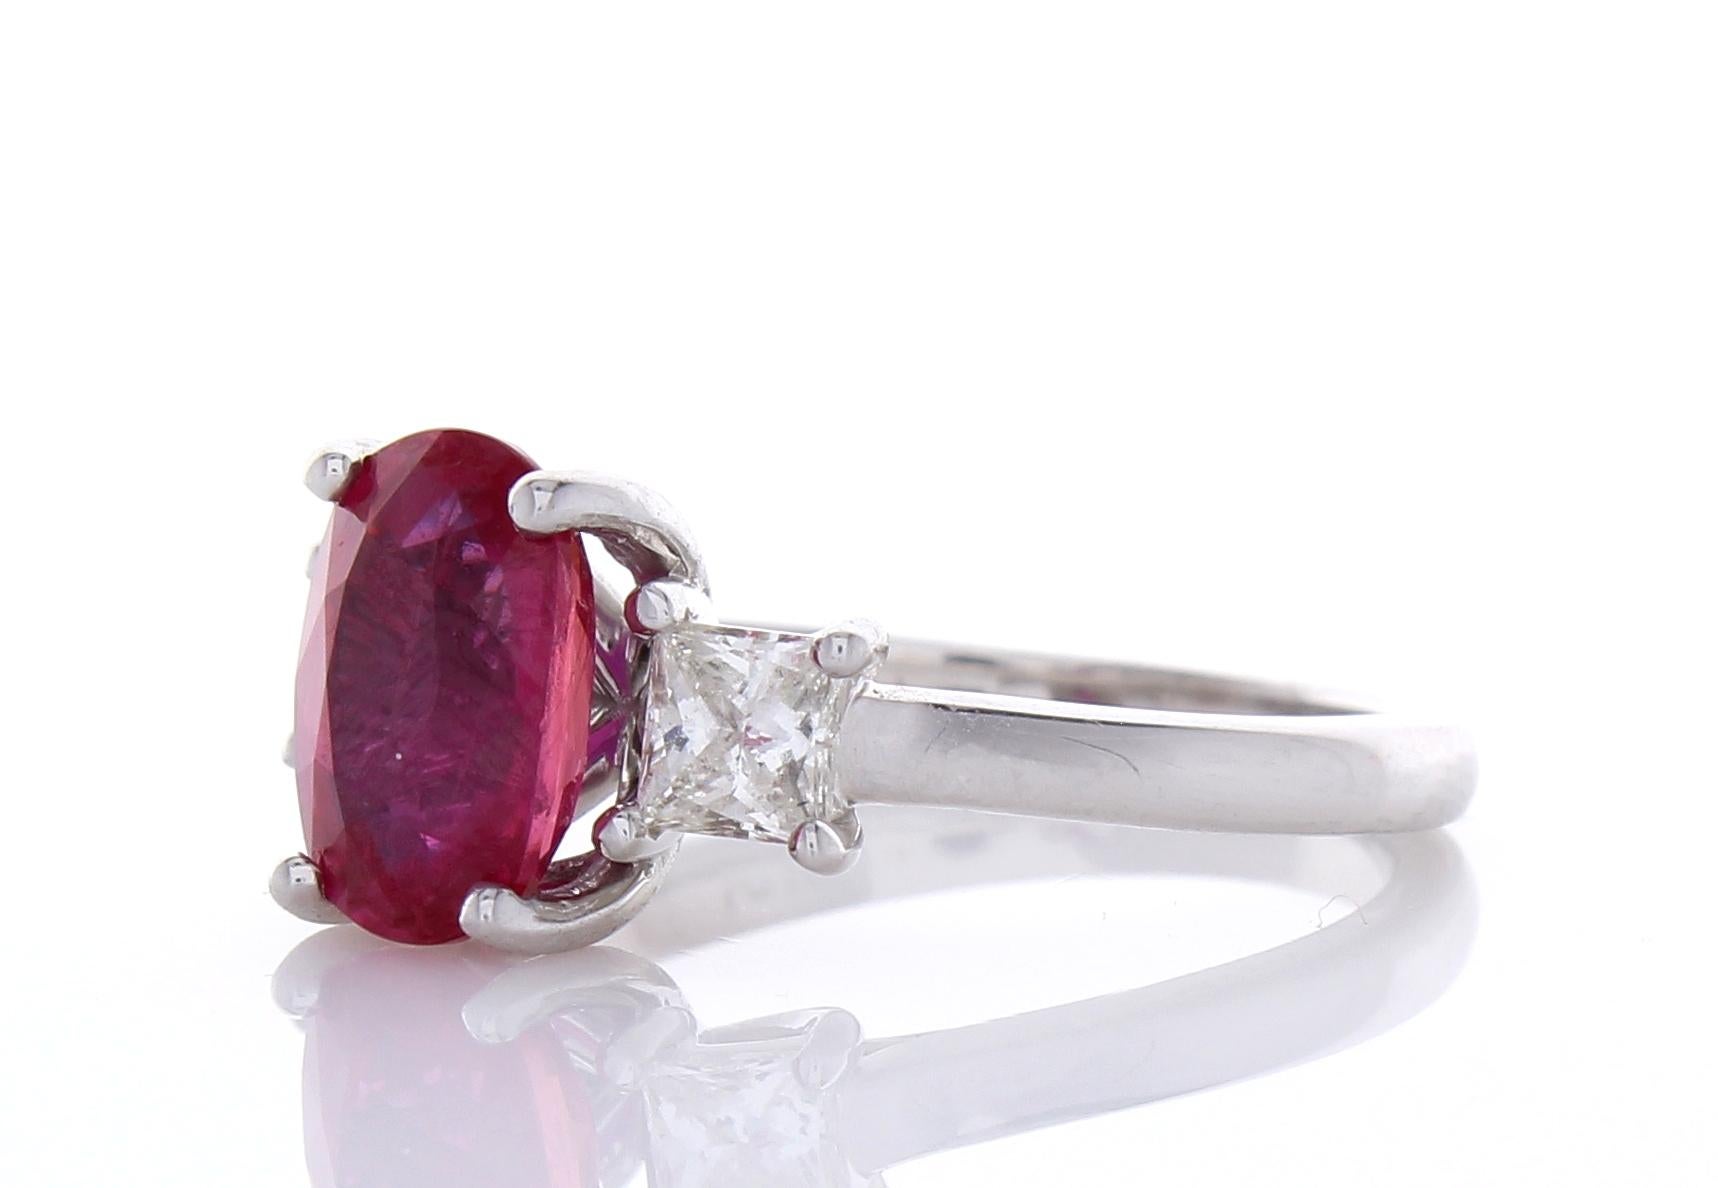 This is a certified 3.02 carat gem that is one of the best layed out cushion cut rubies we have come across. The gem source is Thailand. Its color is intense red; its transparency and luster are excellent. The shape is alluring; it has a fantastic